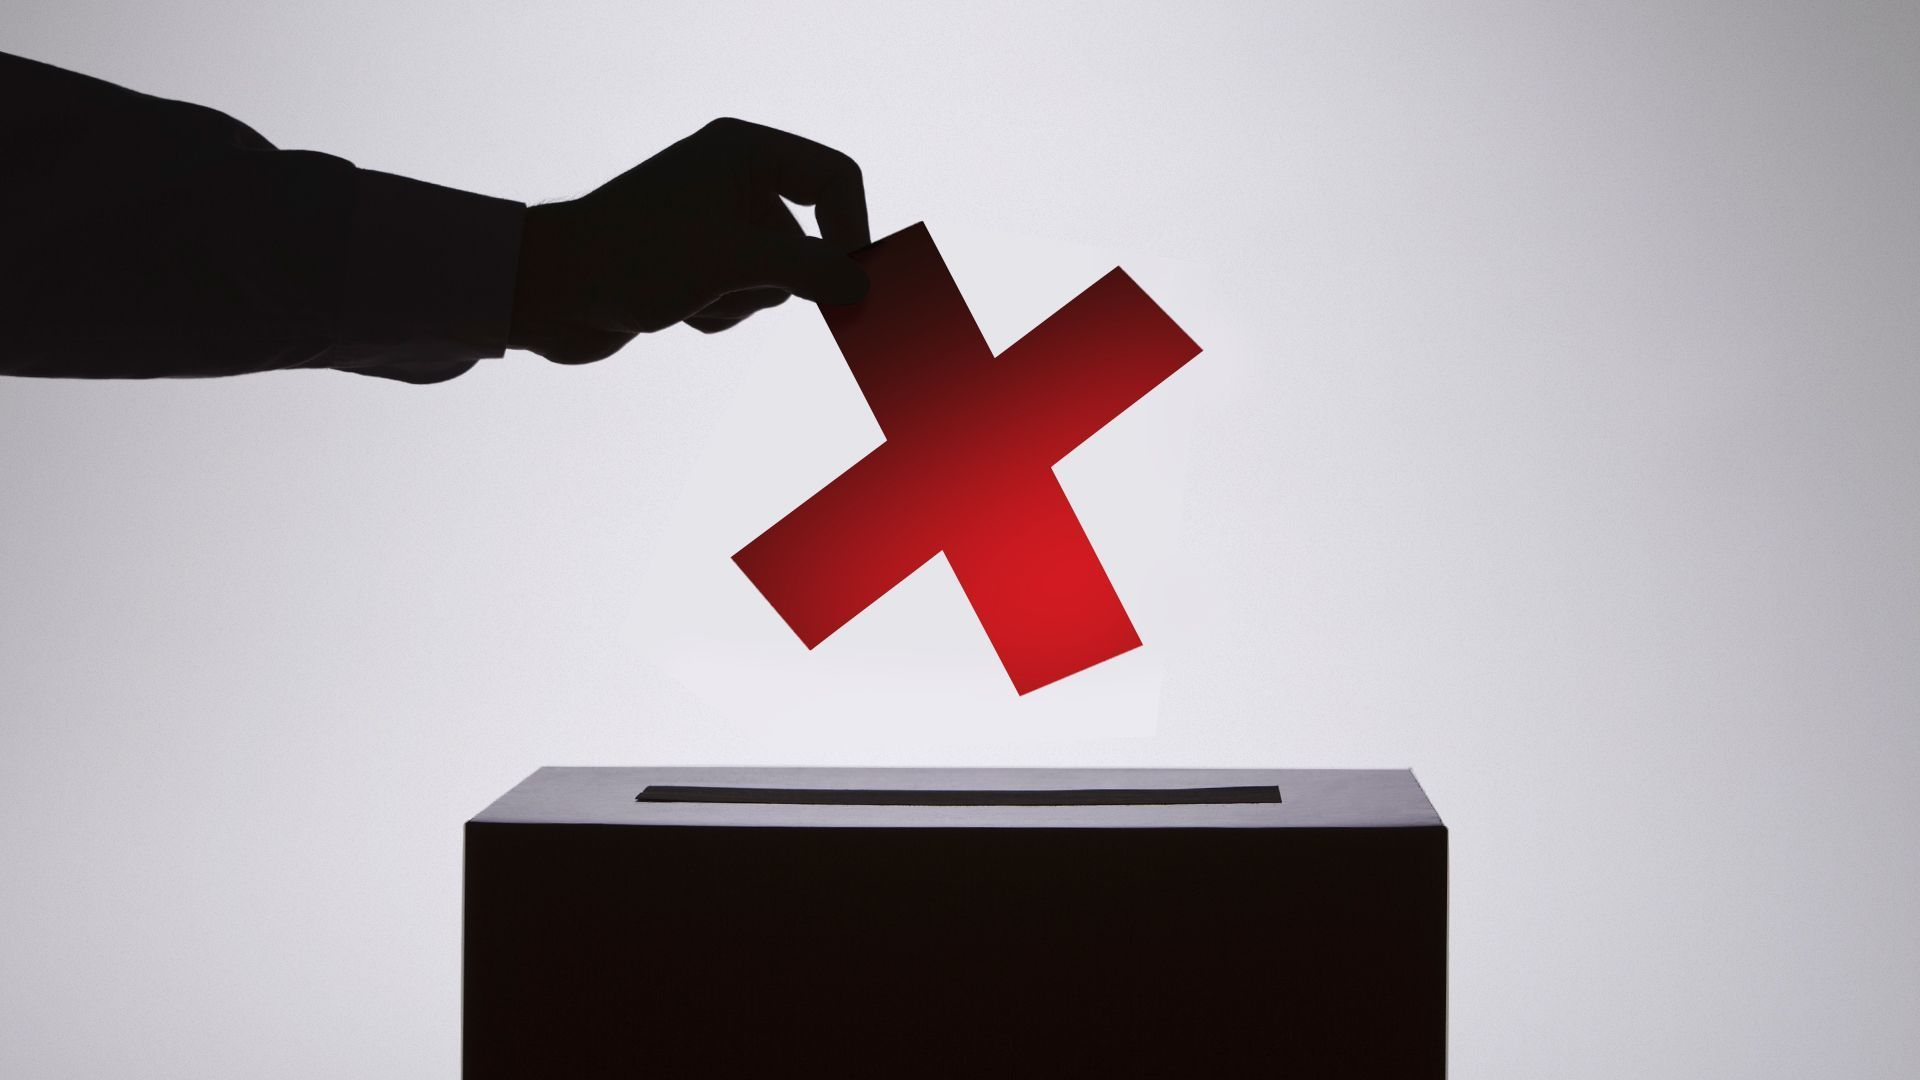 A silhouetted hand places a red X into a ballot box.